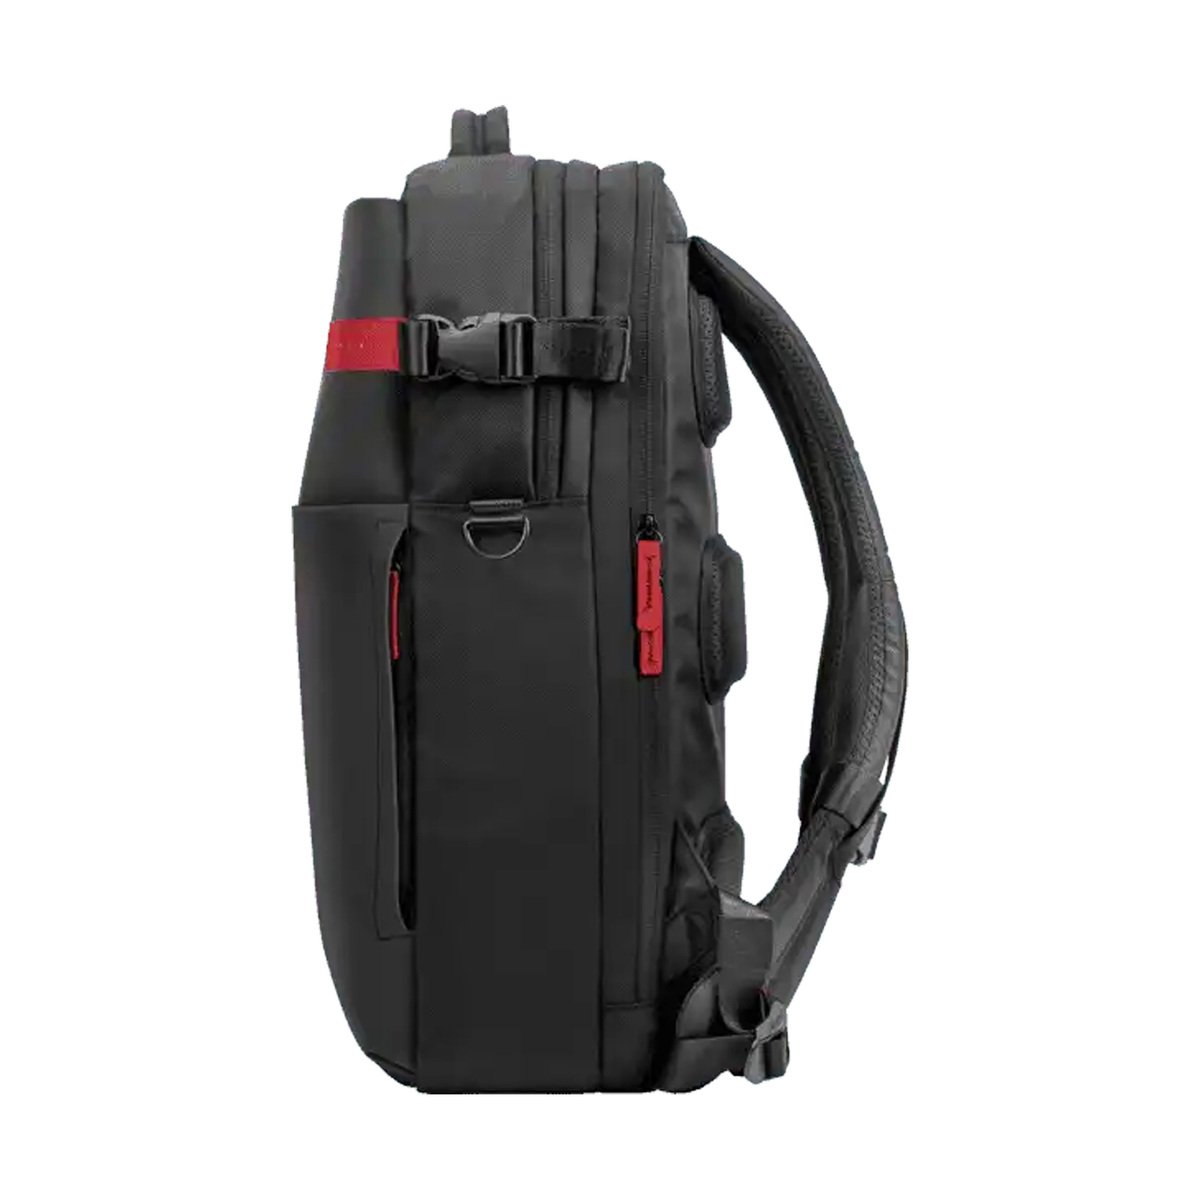 OMEN by HP Gaming Backpack K5Q03AA#ABB 17.3"